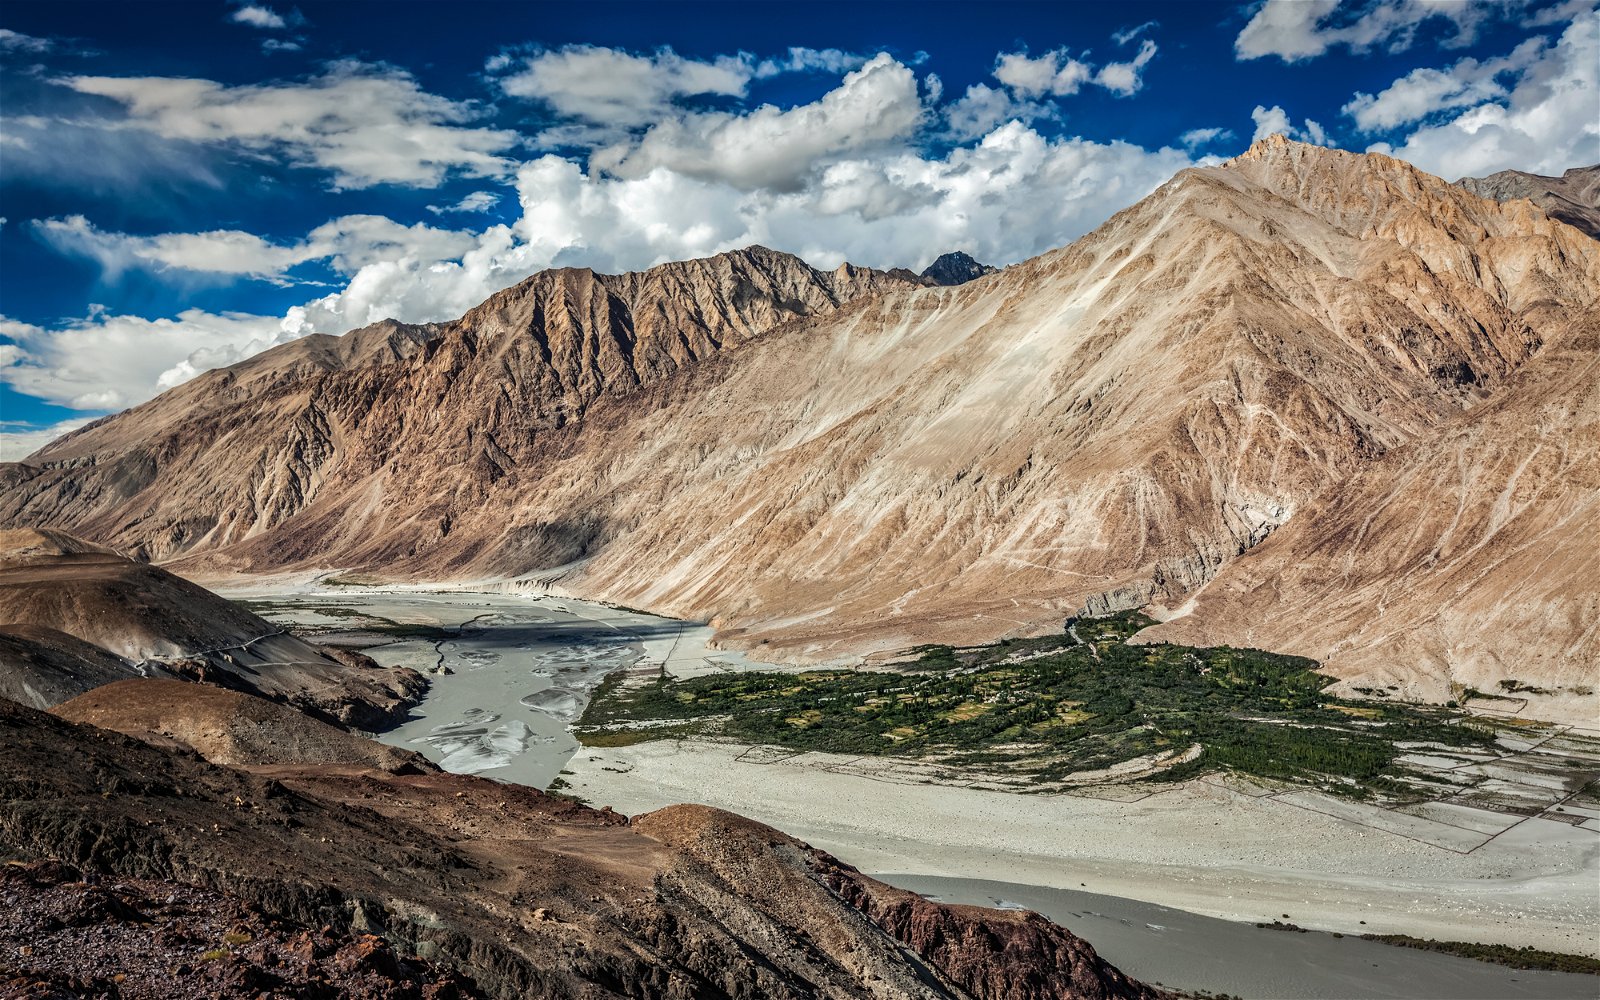 Nubra Valley Tourism  Best Places to Visit & Things to Do in Nubra